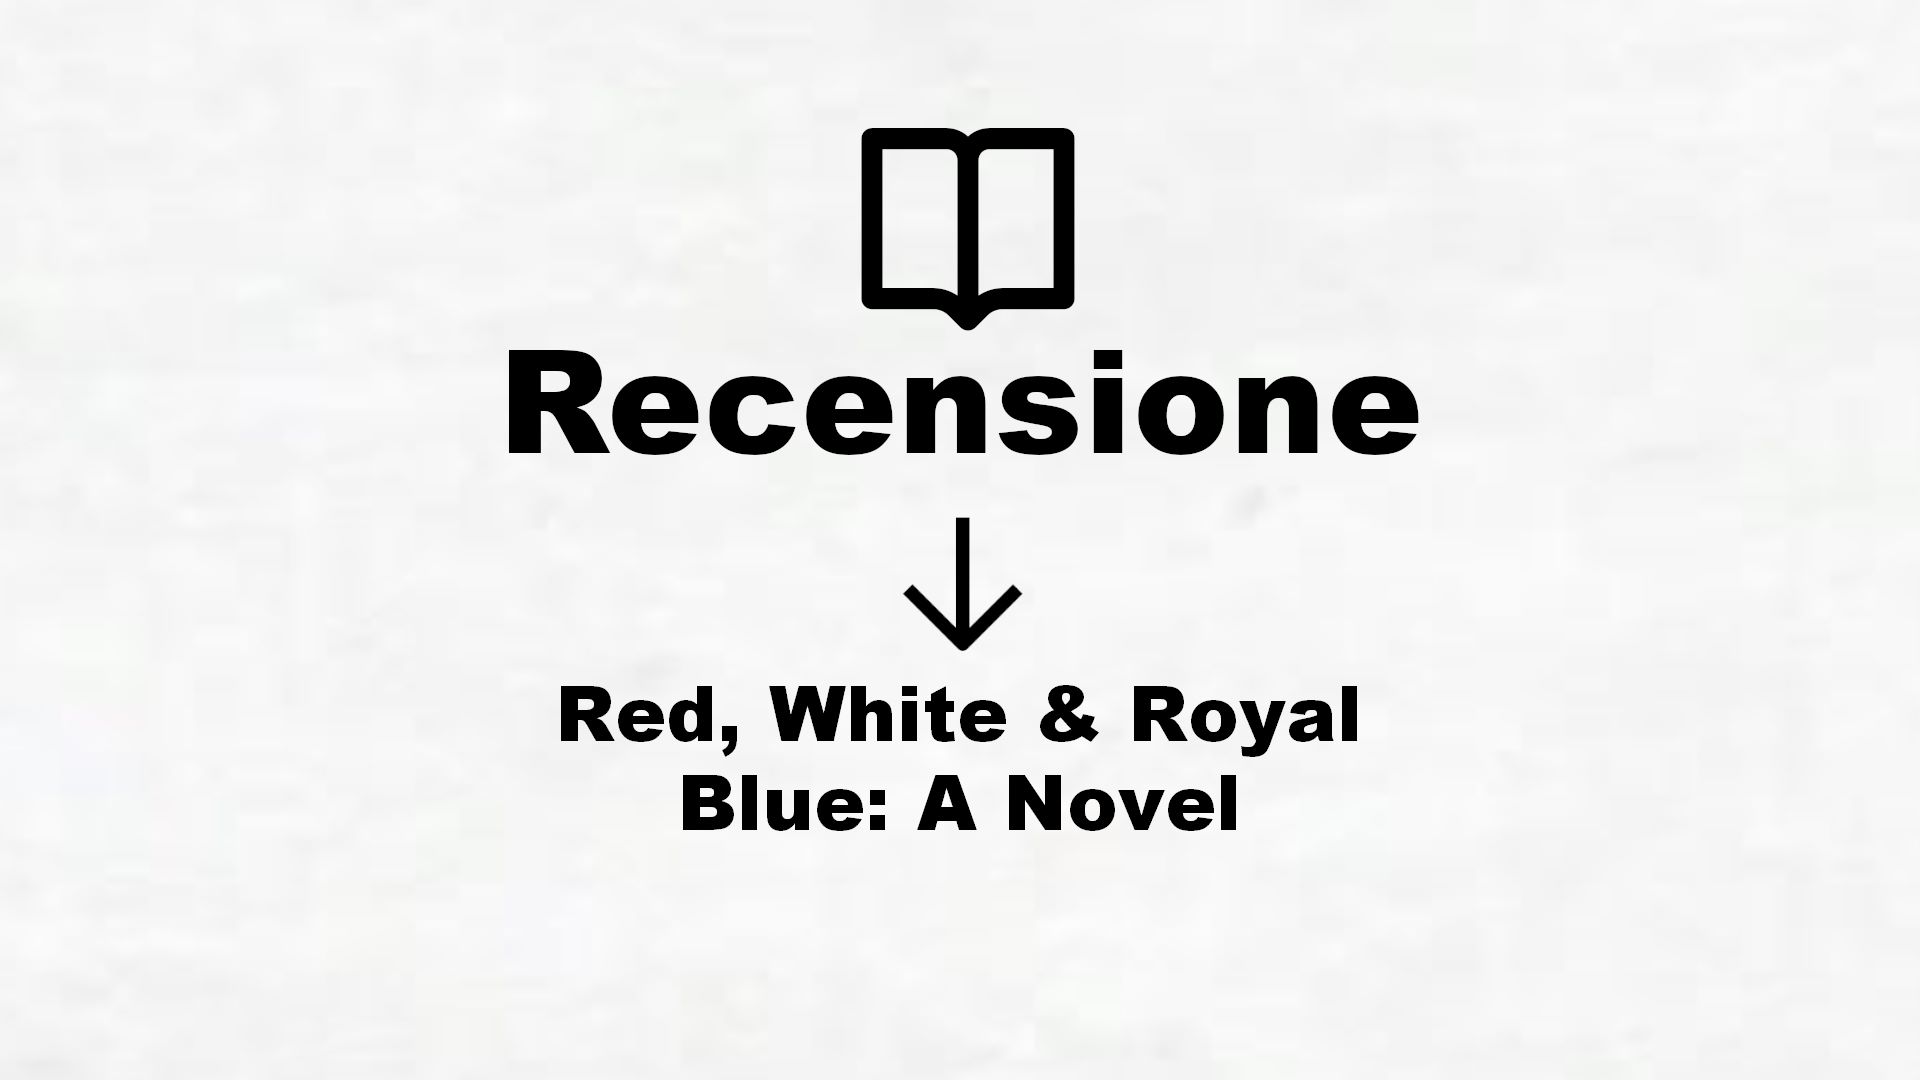 Red, White & Royal Blue: A Novel – Recensione Libro